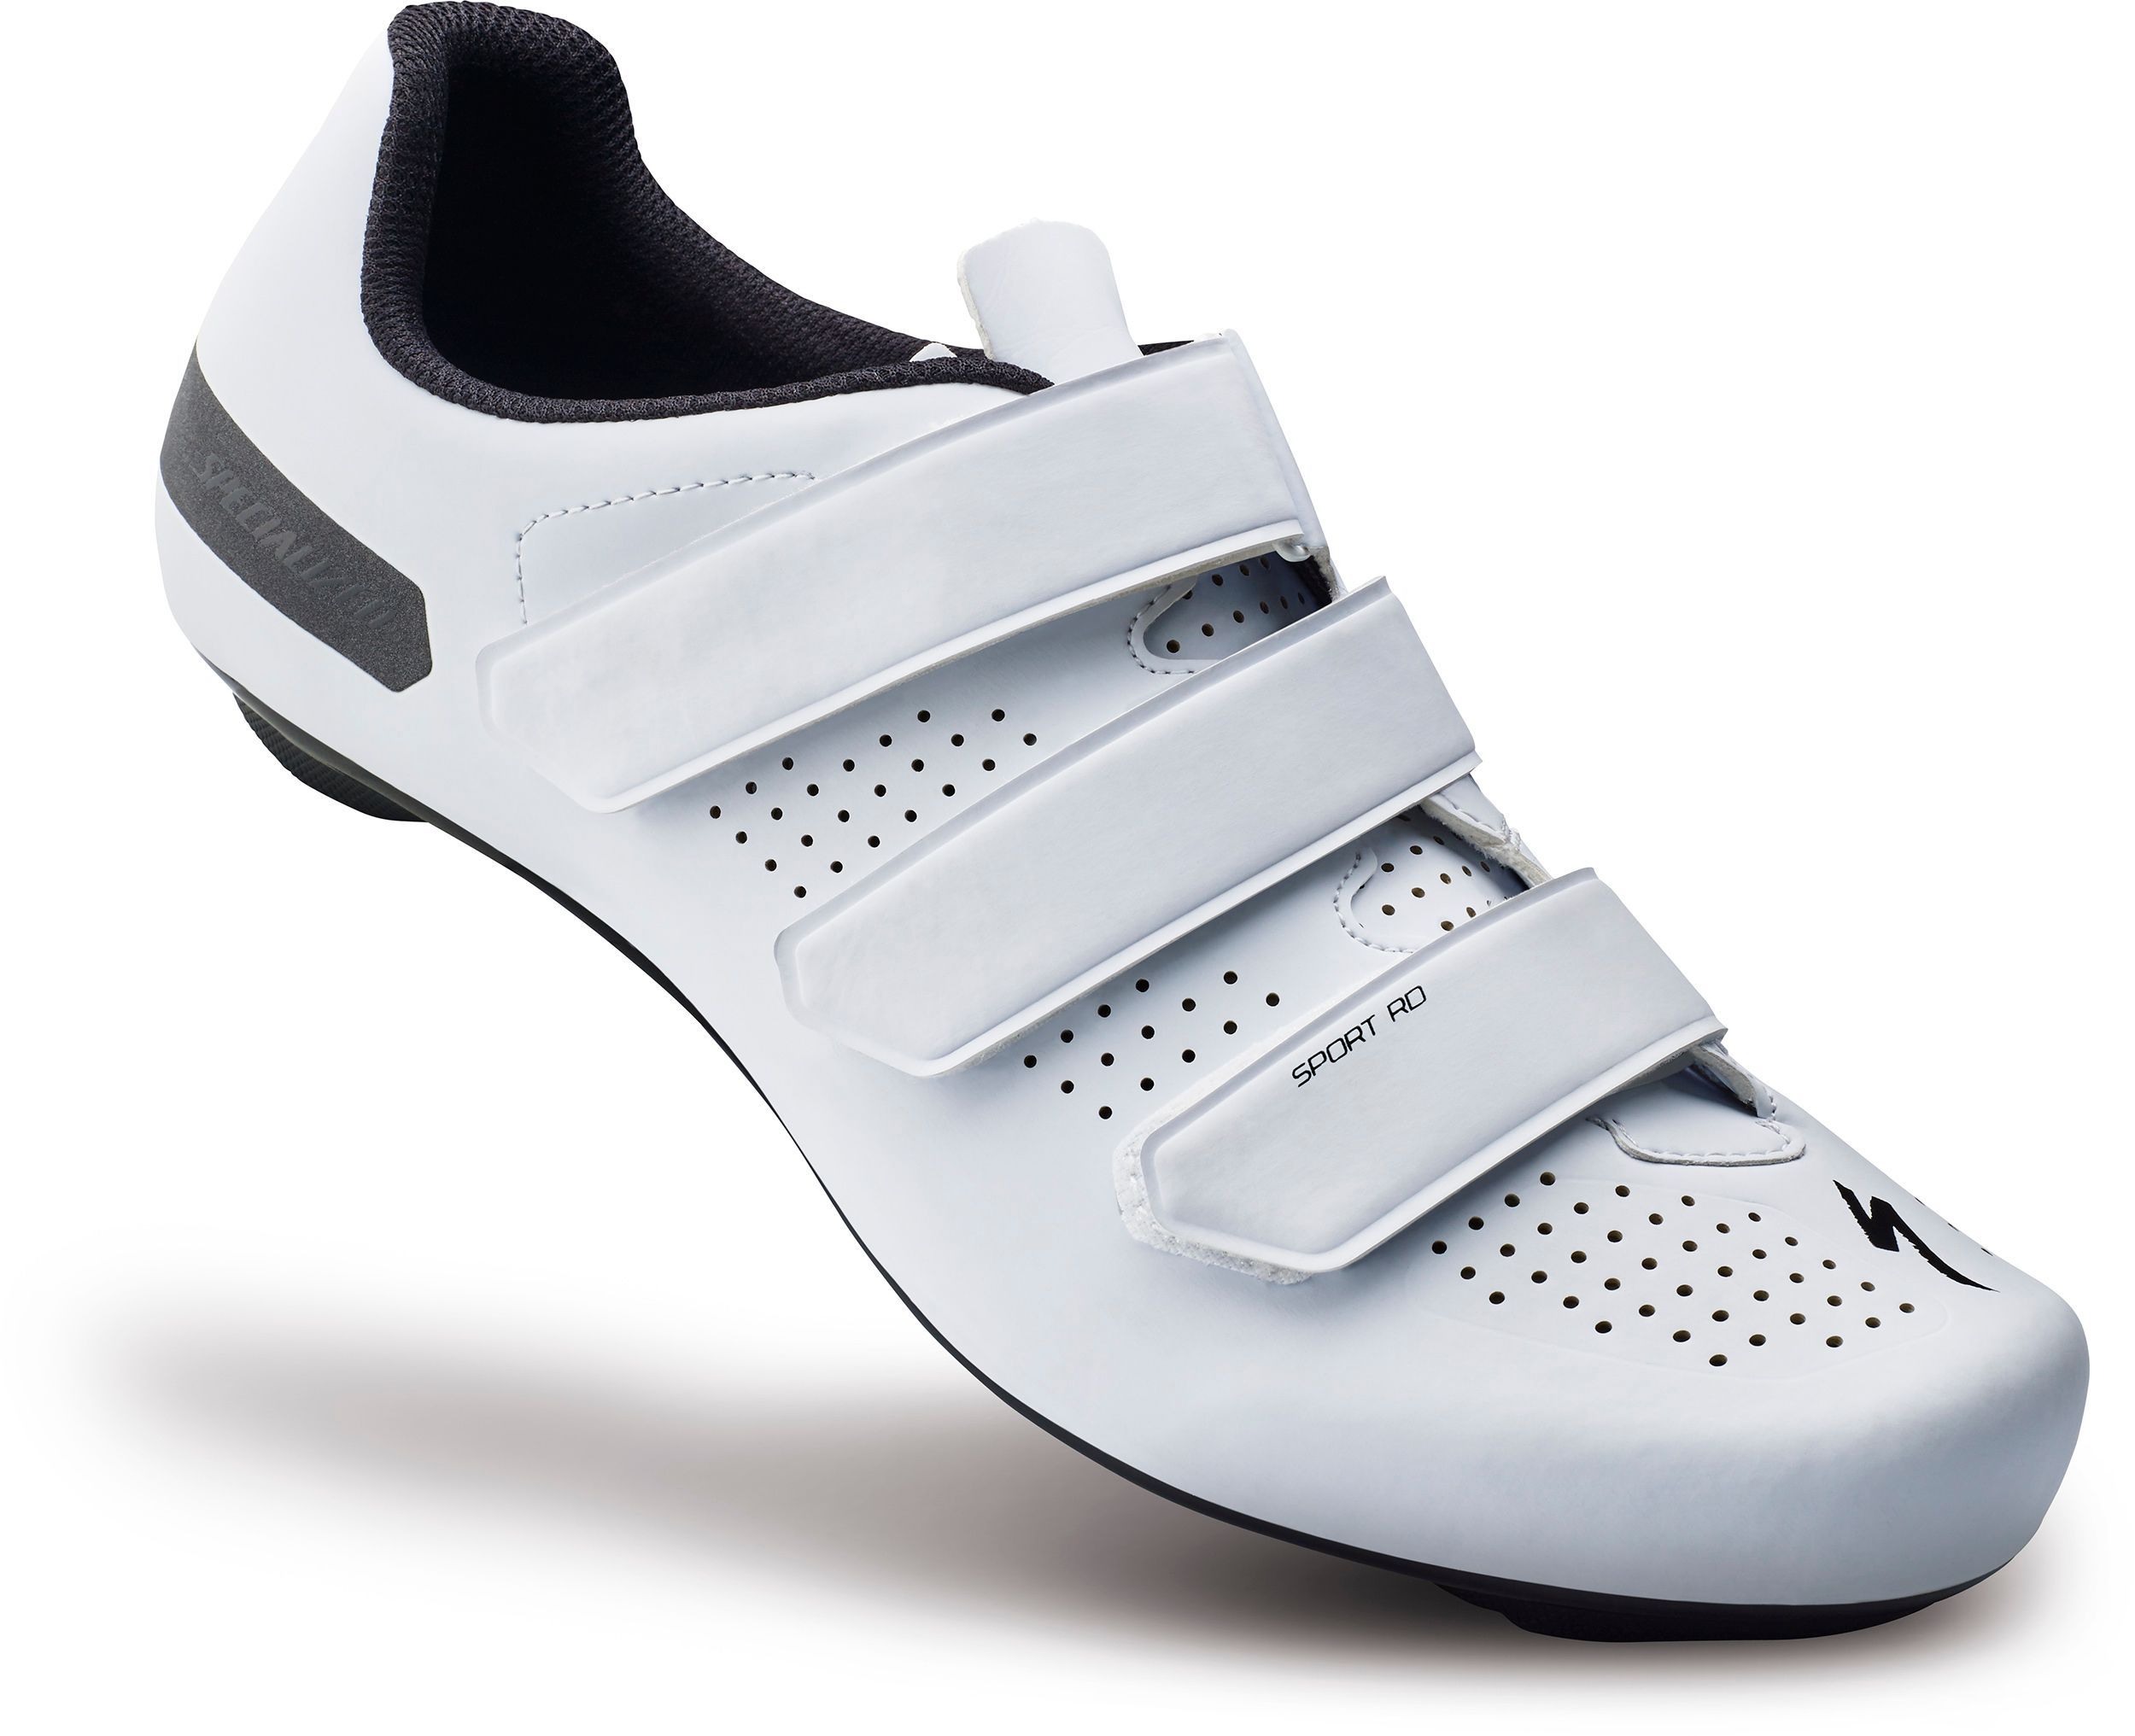 specialised cycling shoes uk